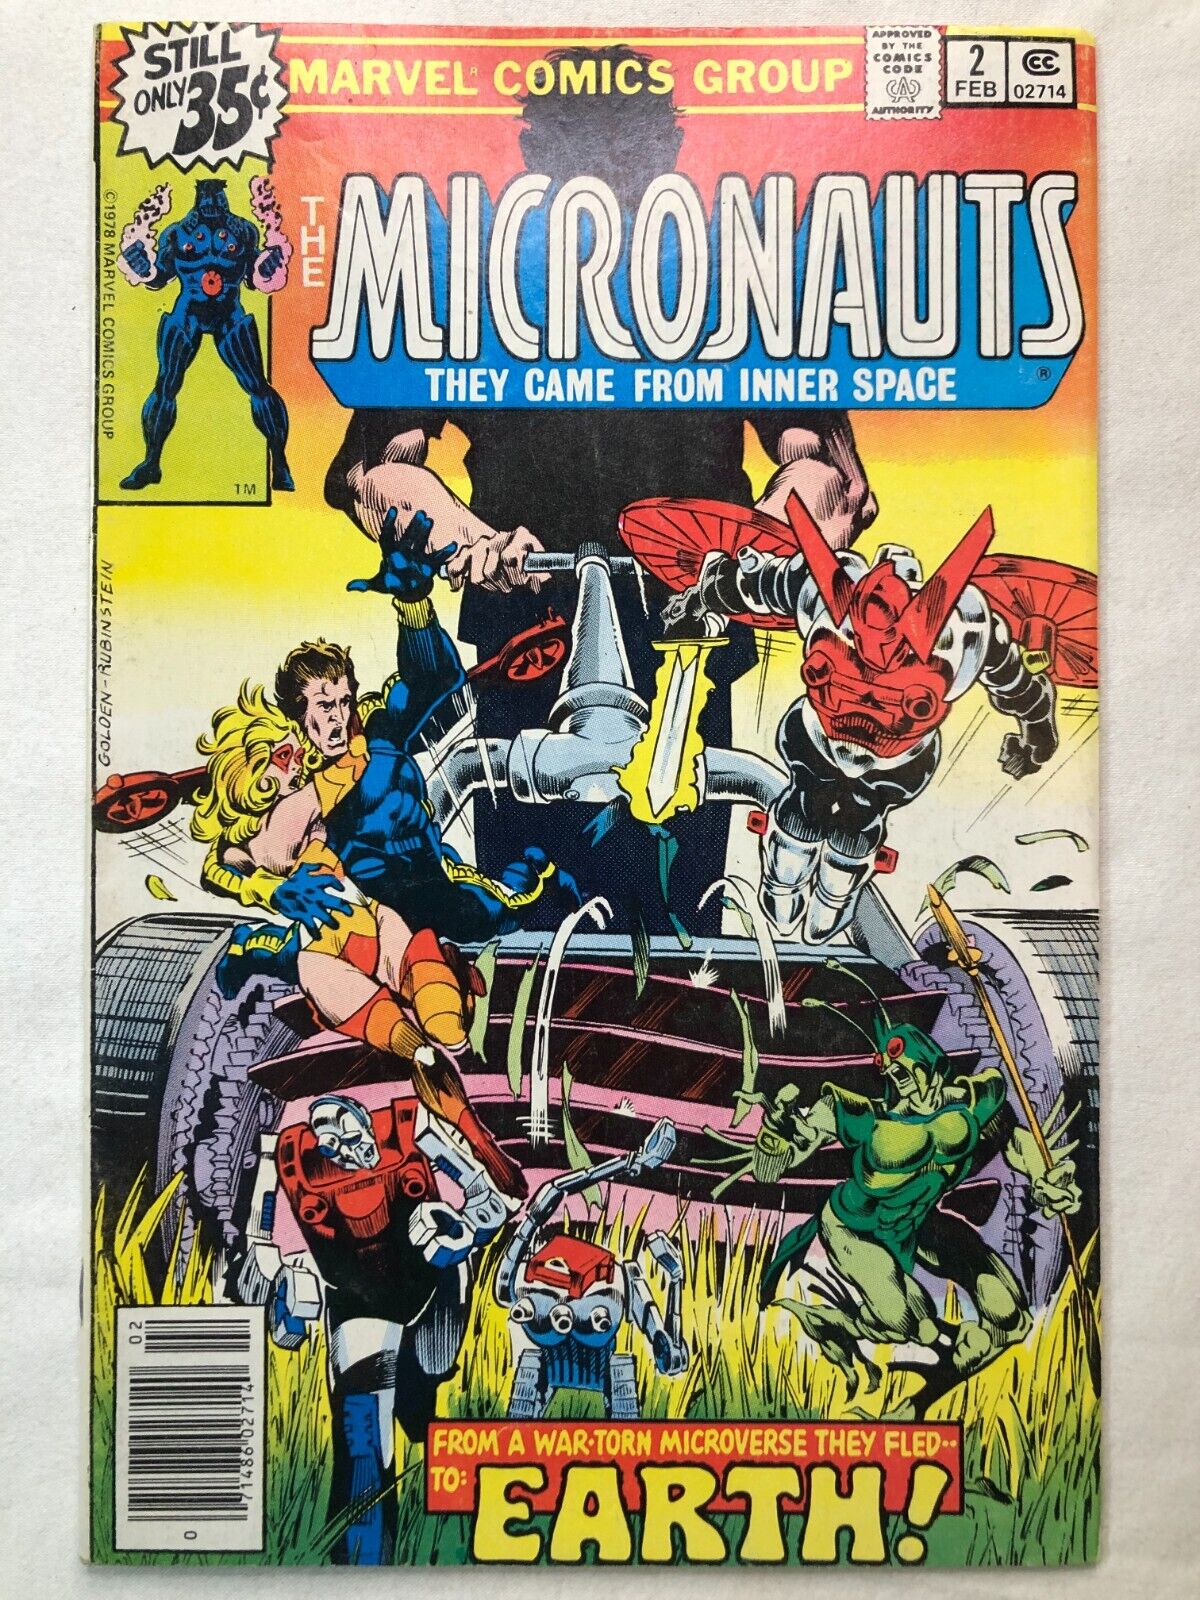 The Micronauts #2 February 1979 Vintage Bronze Age Marvel Comics Collectable